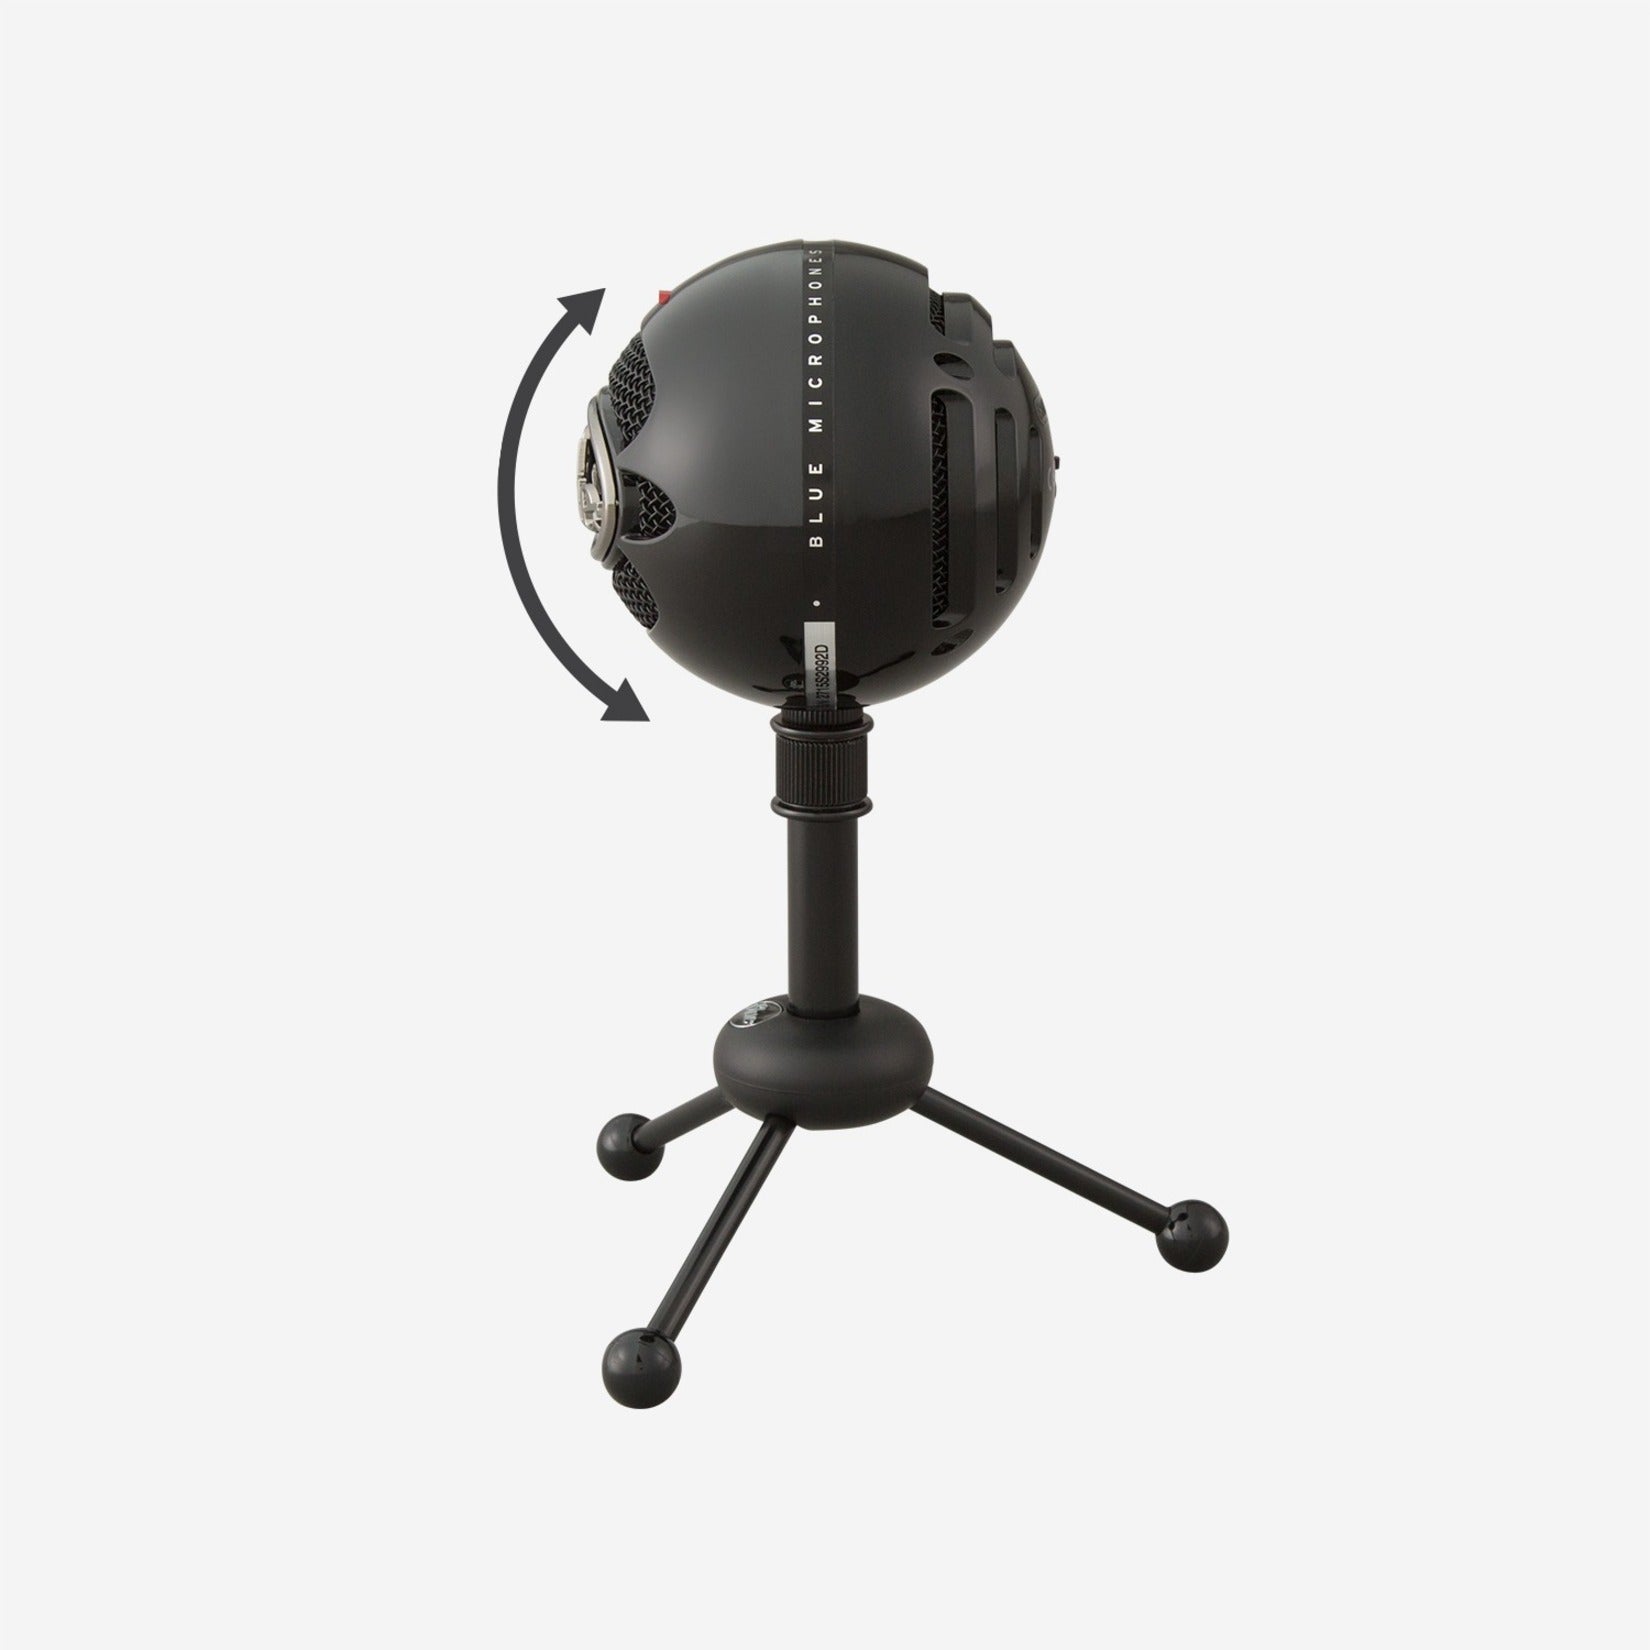 Blue 988-000069 Snowball Classic Studio-Quality USB Microphone, 2 Year Limited Warranty, Cardioid & Omni-directional Polar Pattern, Stand Mountable, Condenser Technology